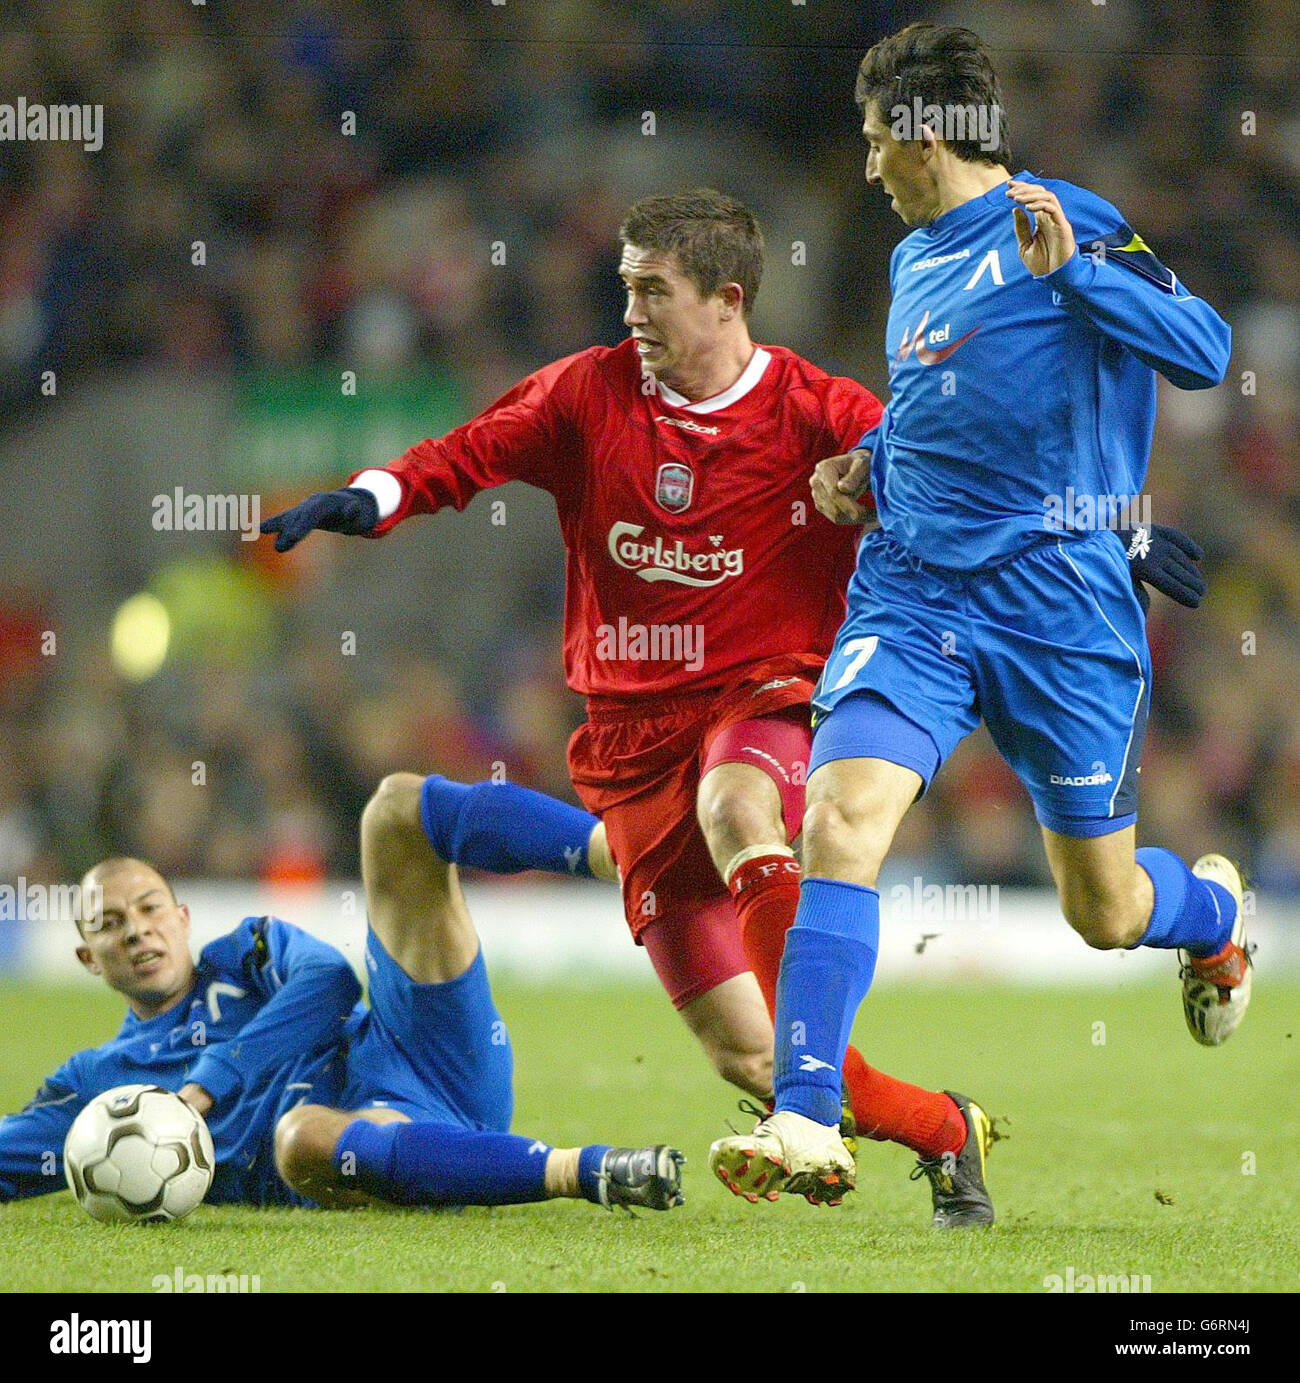 Liverpool's Harry Kewell in action against PFC Levski Sofia's, during their UEFA Cup, 3rd round, 1st leg match at Anfield, Liverpool. Stock Photo